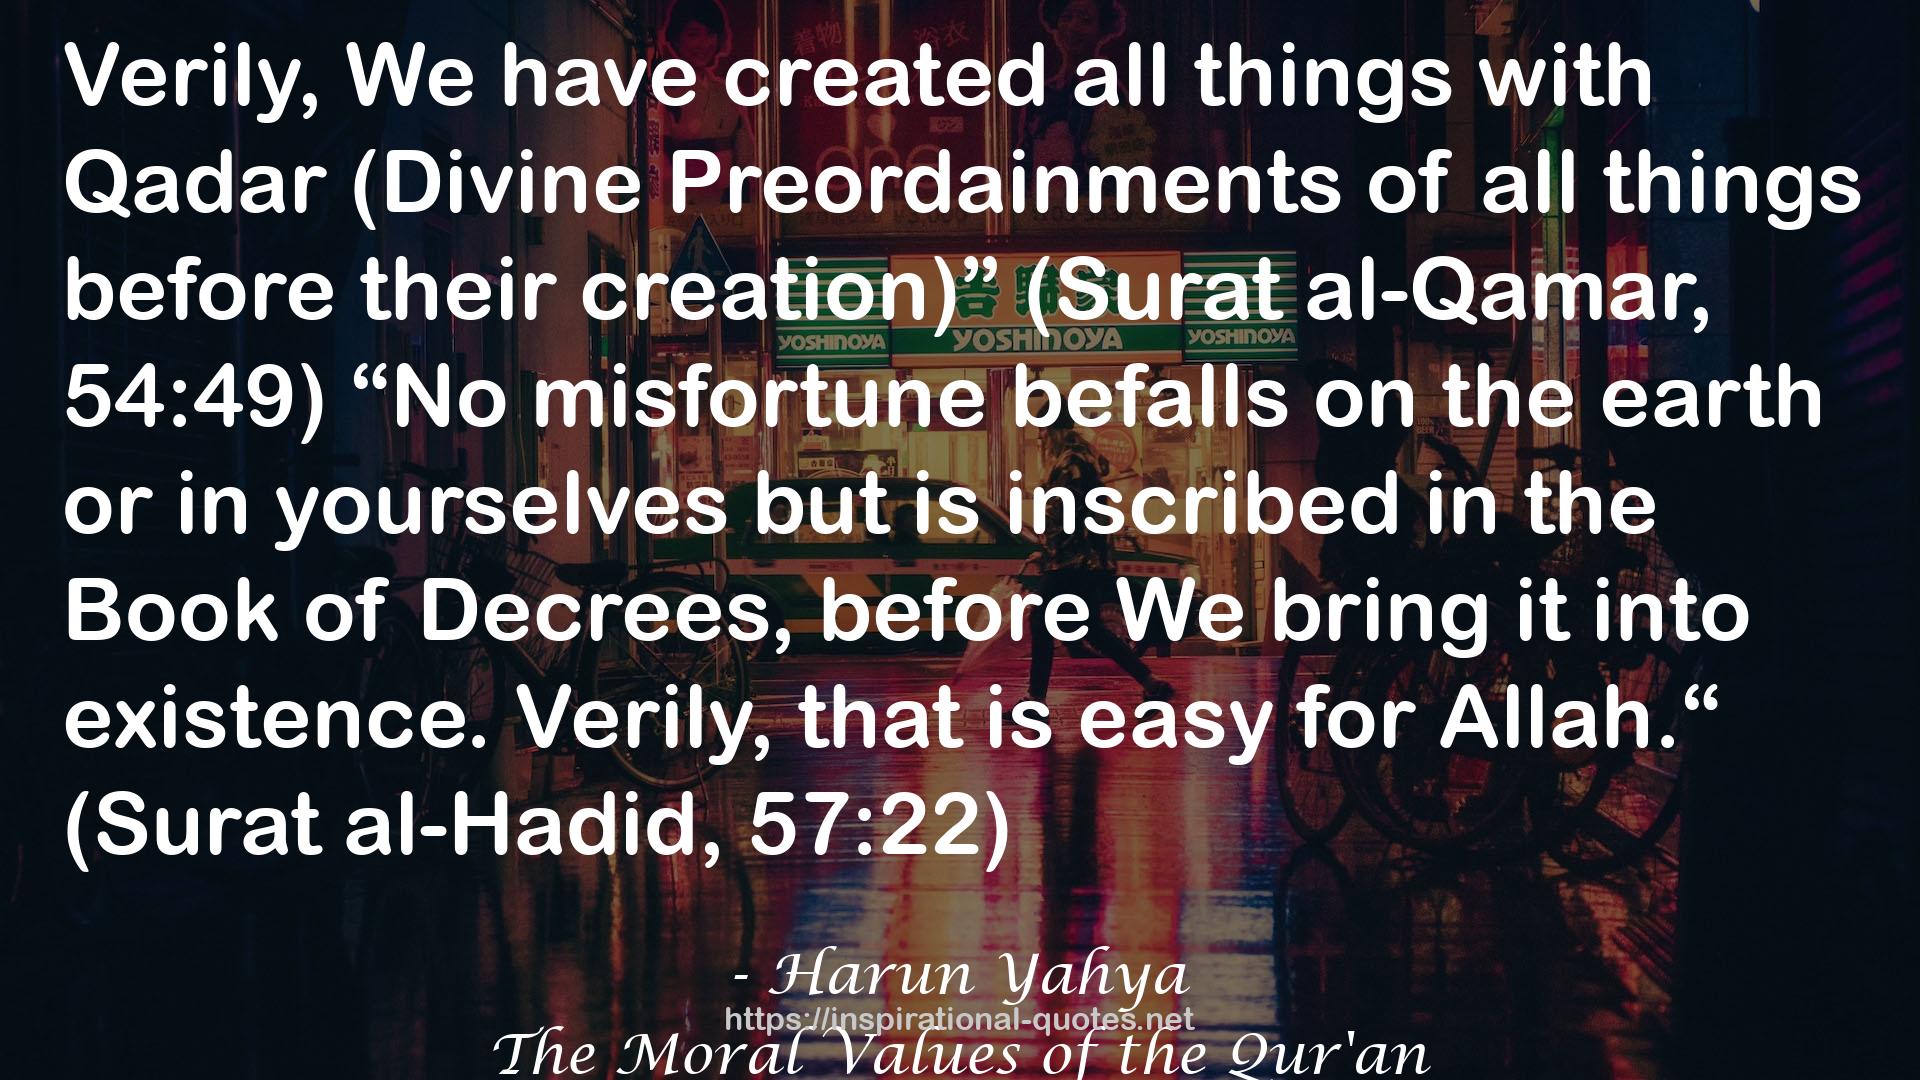 The Moral Values of the Qur'an QUOTES